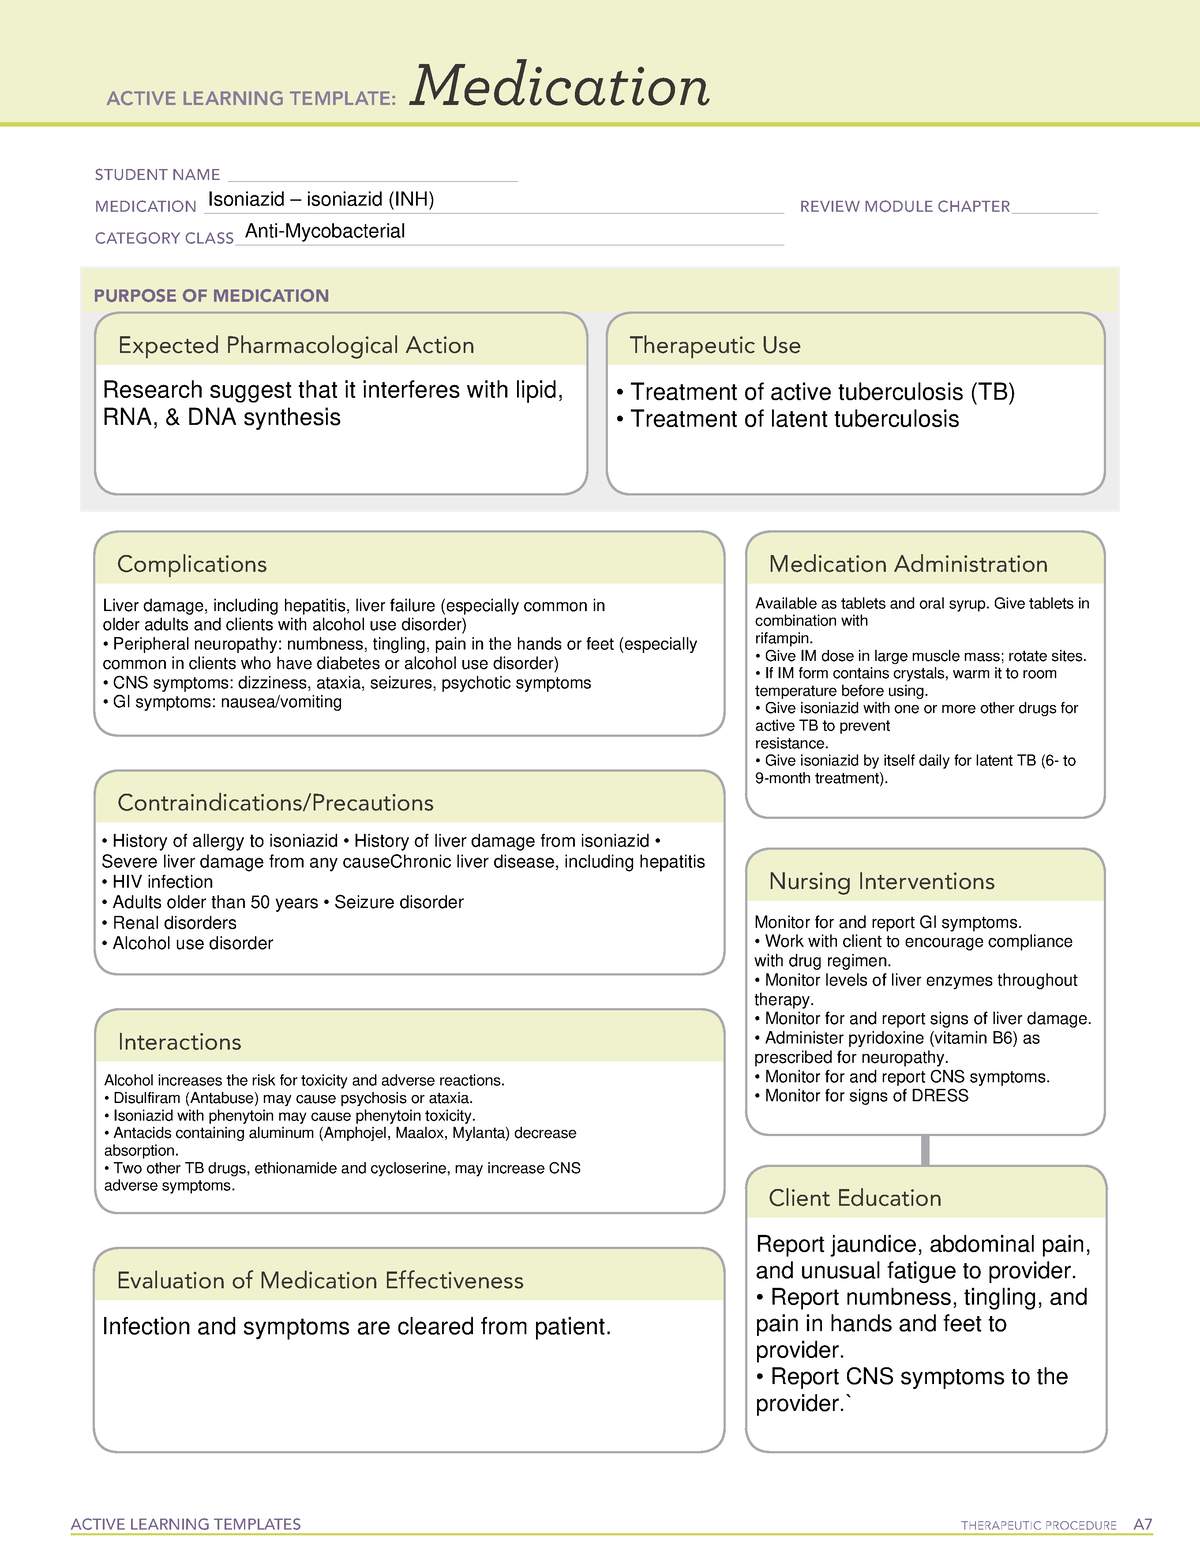 ati-isoniazid-isoniazid-inh-med-sheet-active-learning-template